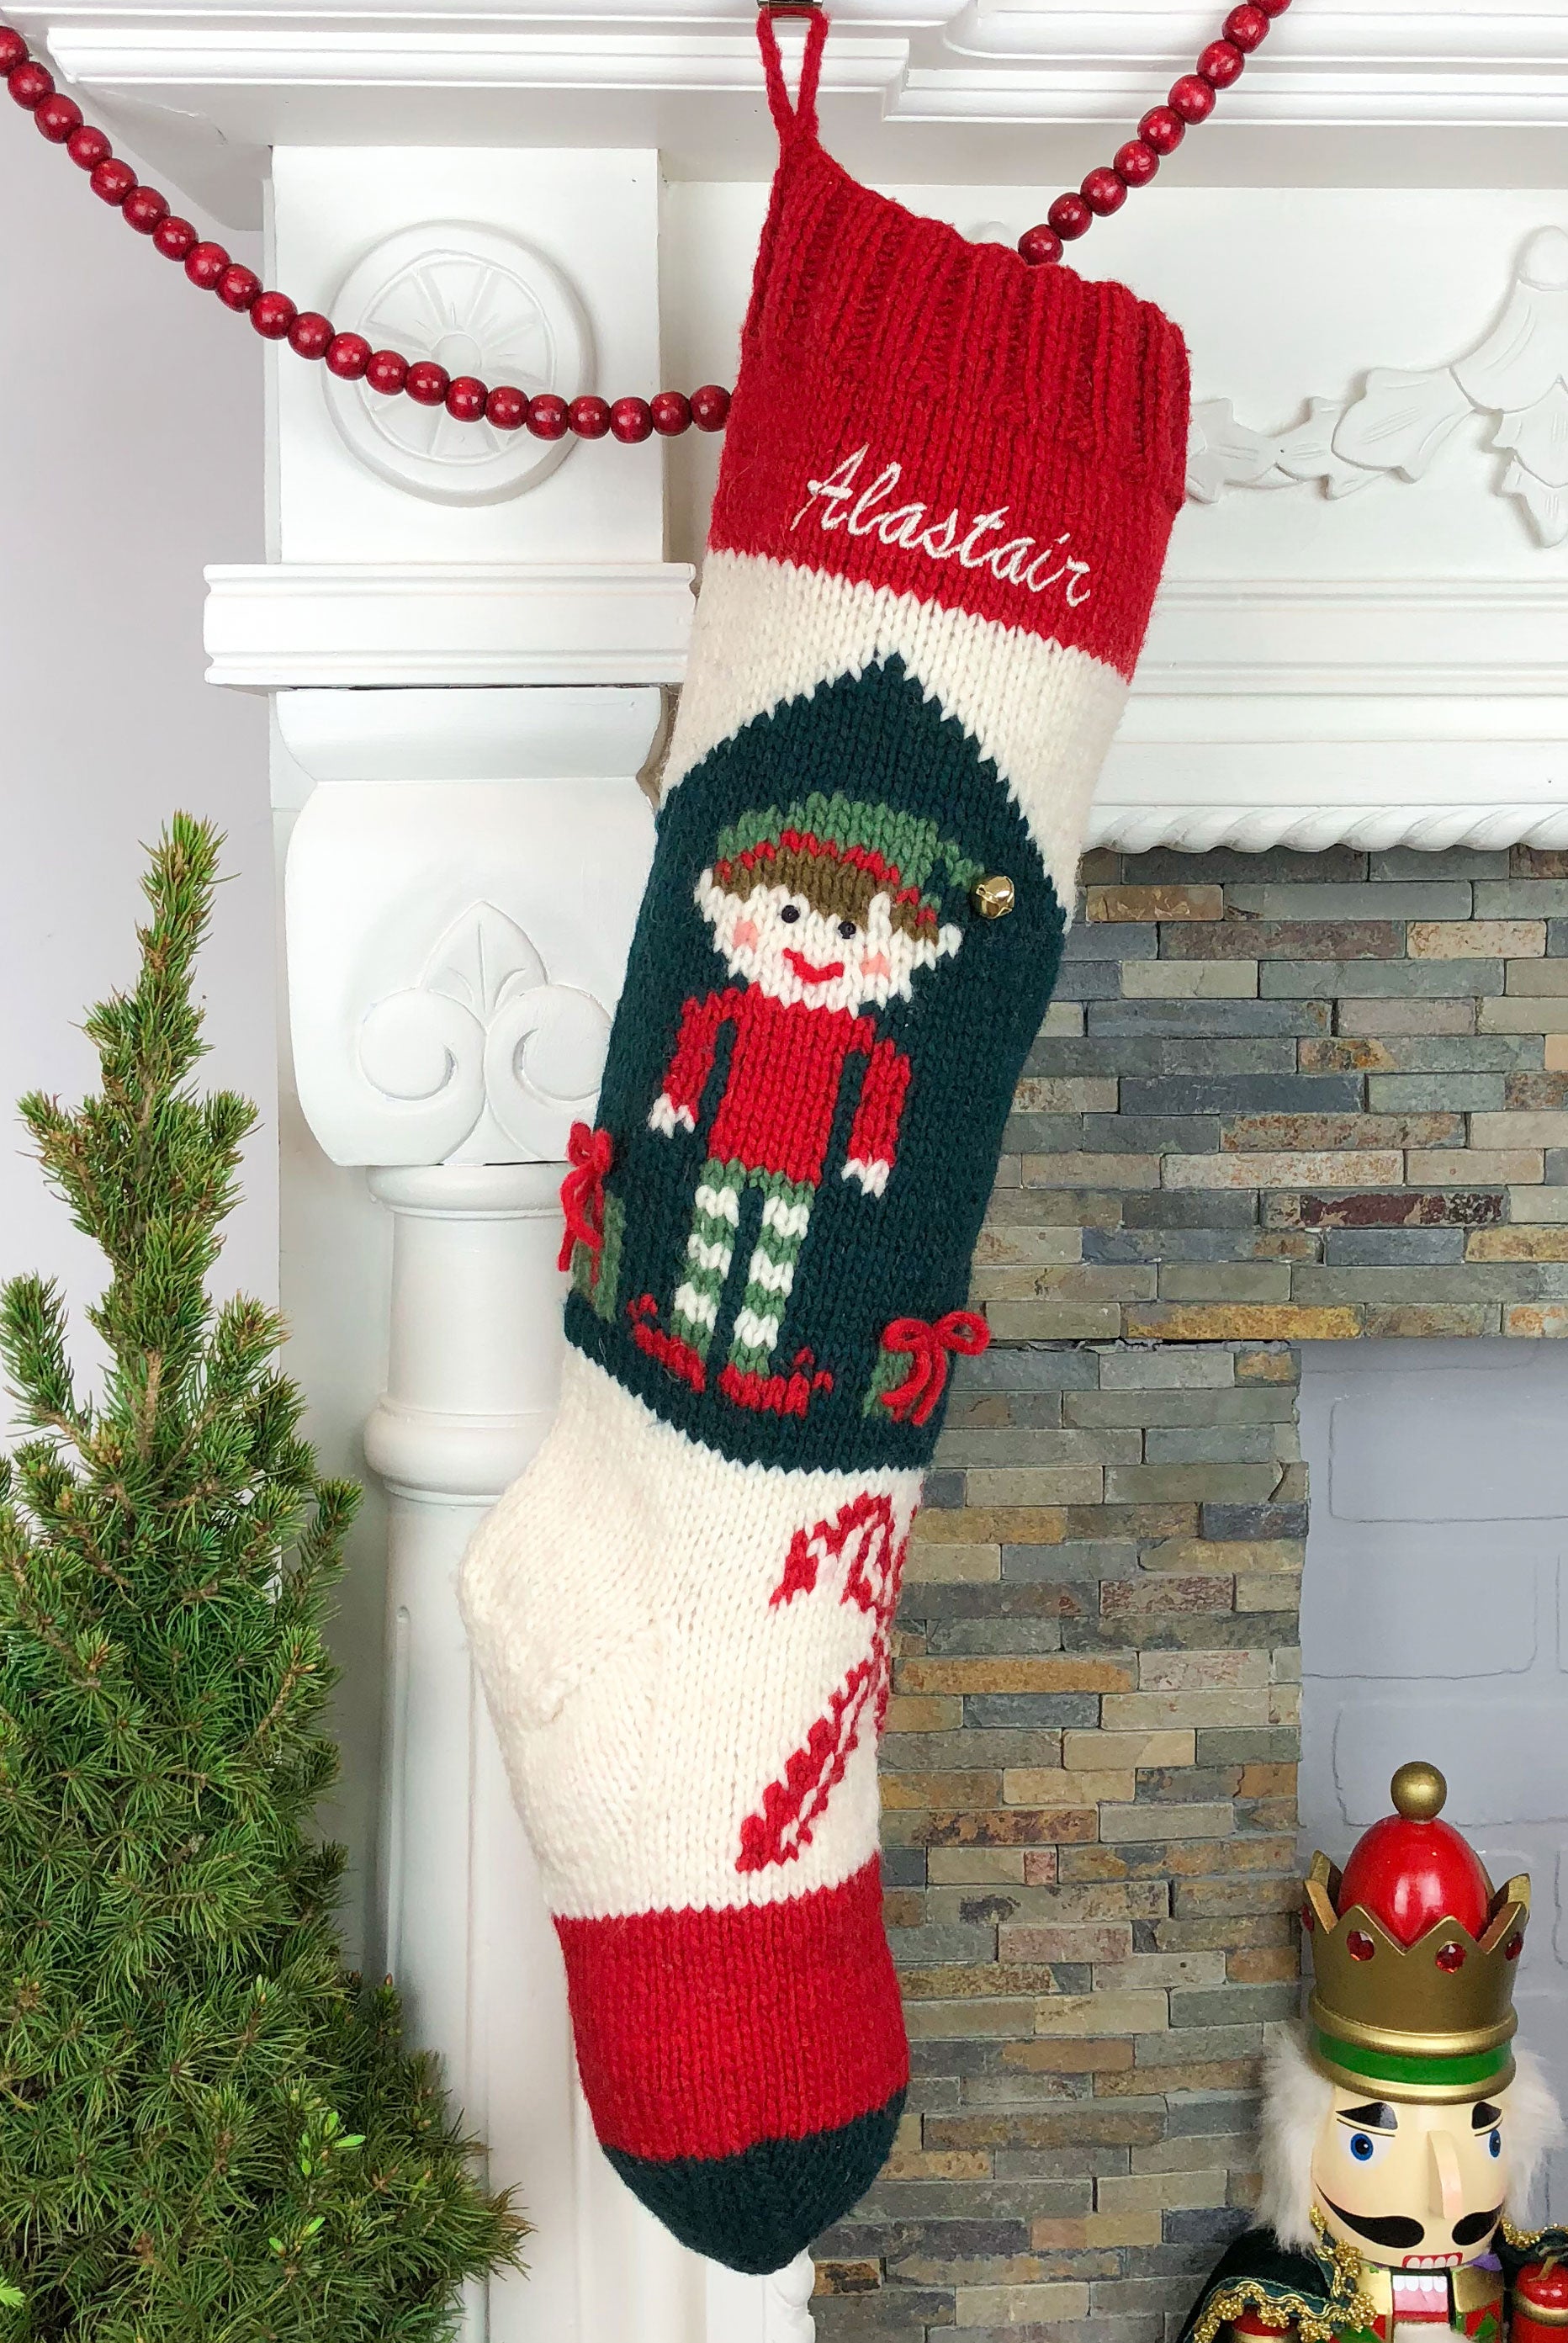 Personalized hand knit elf Christmas stocking